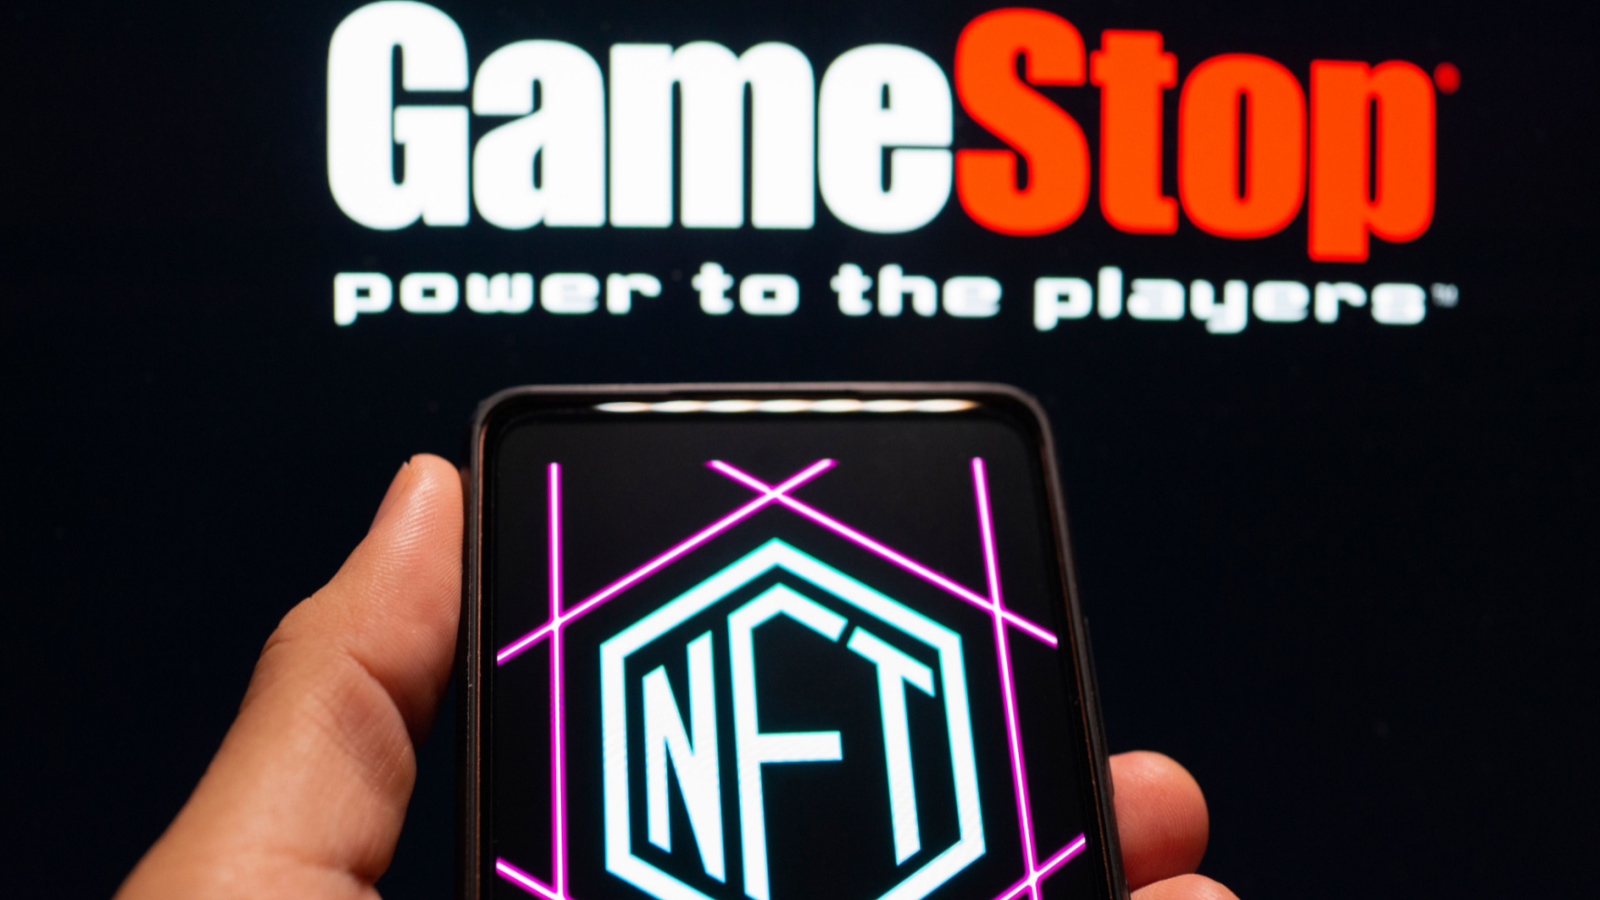 The GameStop (GME) logo above the NFT logo on a smartphone.